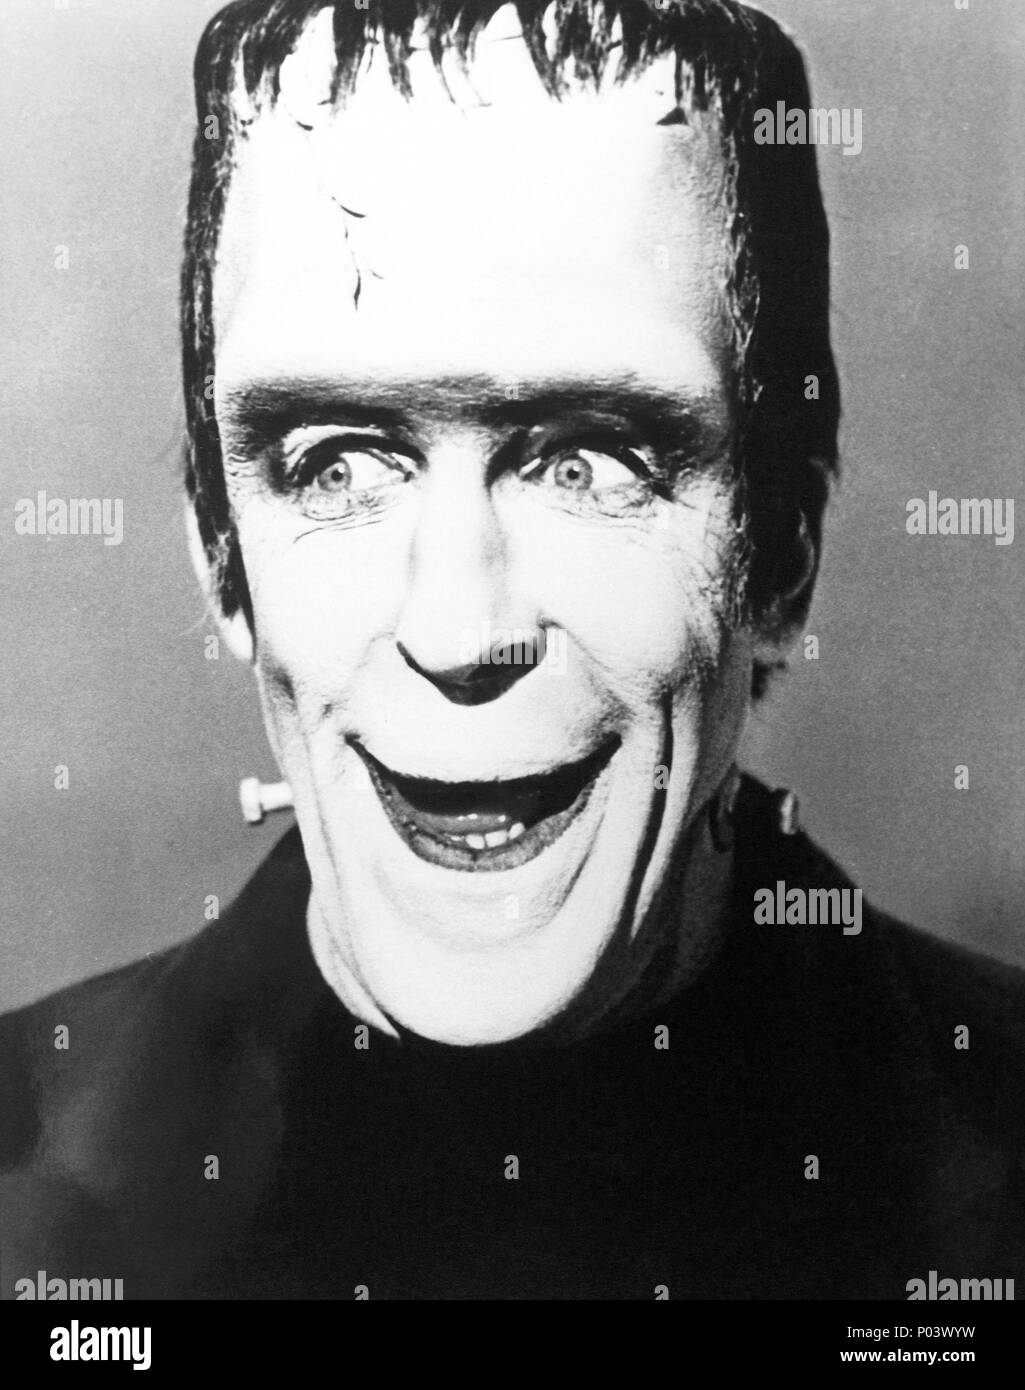 Original Film Title: THE MUNSTERS.  English Title: THE MUNSTERS.  Year: 1964.  Stars: FRED GWYNNE. Credit: CBS/MCA/UNIVERSAL / Album Stock Photo